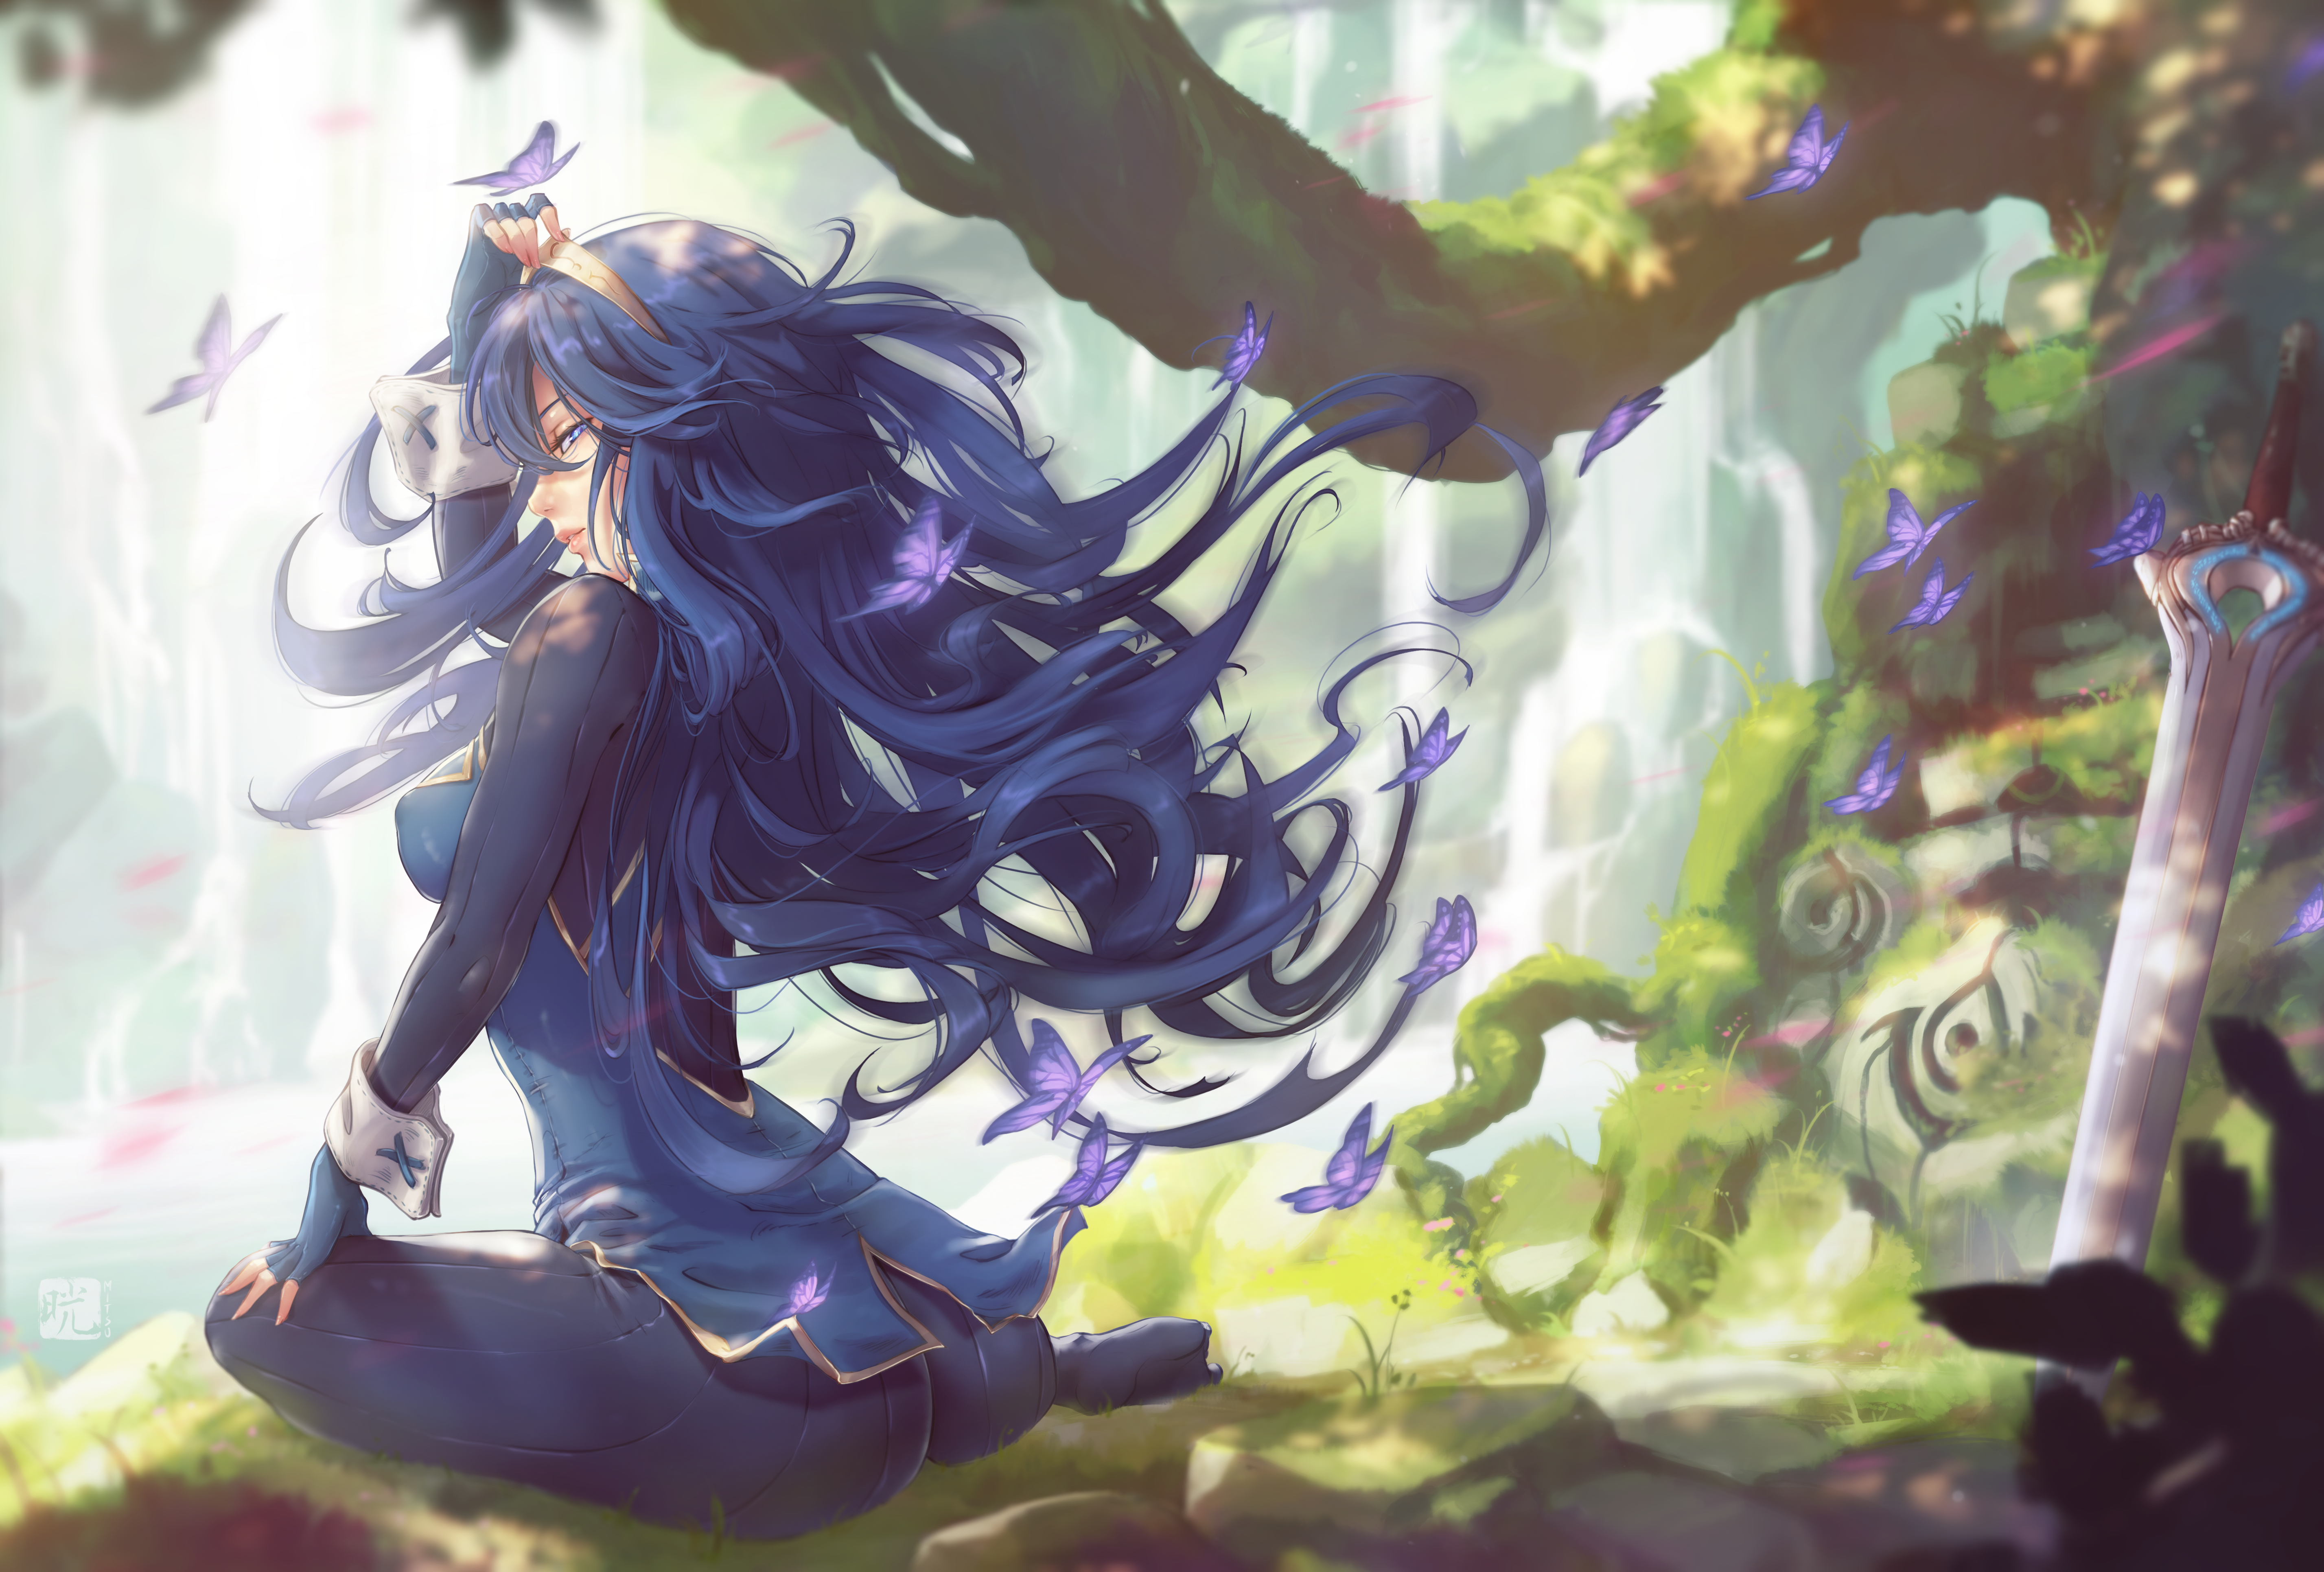 Anime 5710x3862 Lucina Fire Emblem video games video game girls video game characters blue hair long hair headband profile parted lips sensual gaze sitting behind tight clothing bodysuit ass butterfly waterfall sword anime anime girls 2D artwork drawing illustration fan art Mitsu